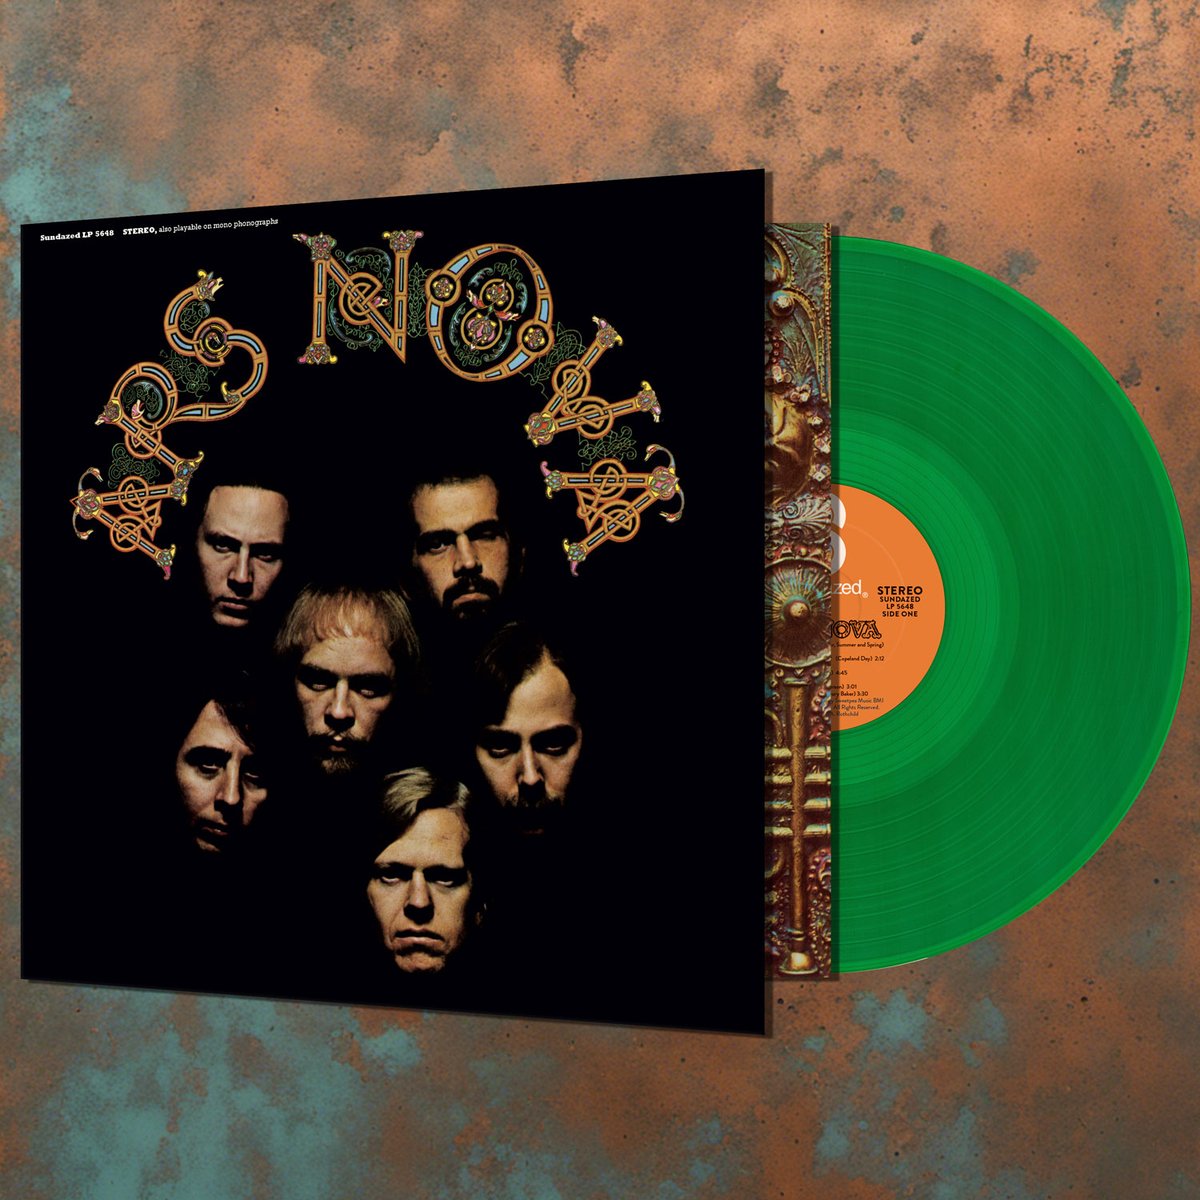 Available 5/24! Classical infused psych from NY groovers Ars Nova! Through their creative use of medieval modes & hook-driven pop, Ars Nova delivers psychedelia within a classical & prog rock lens. Pressed on black or green vinyl! Preorder here: sundazed.com/ars-nova.aspx